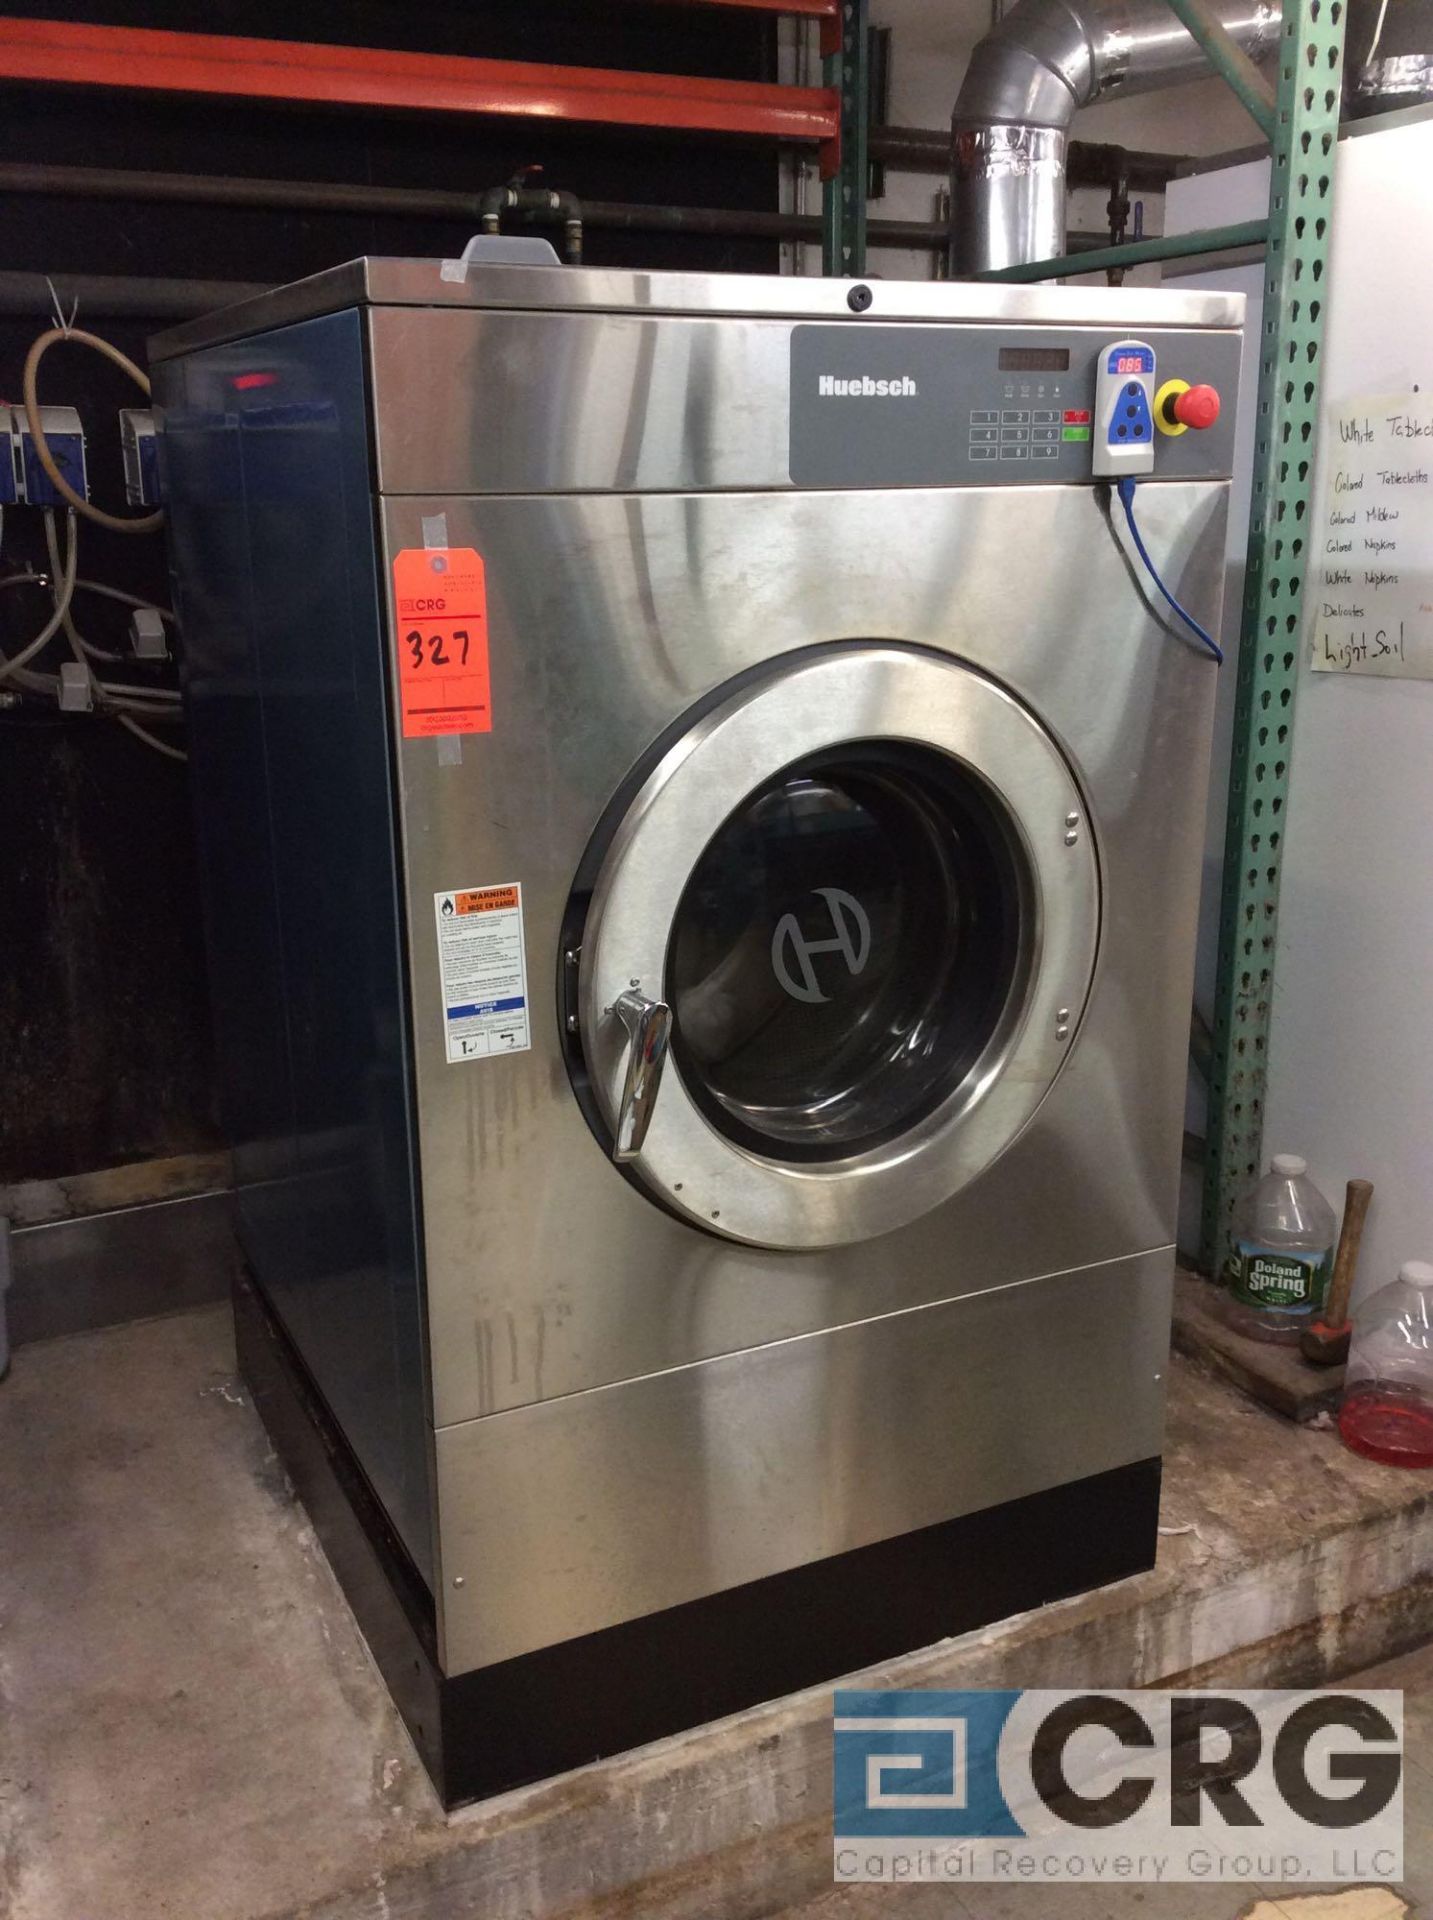 2019 Huebsch HCT060 commercial stainless steel washing machine, 60 lb capacity, sn 1904033477